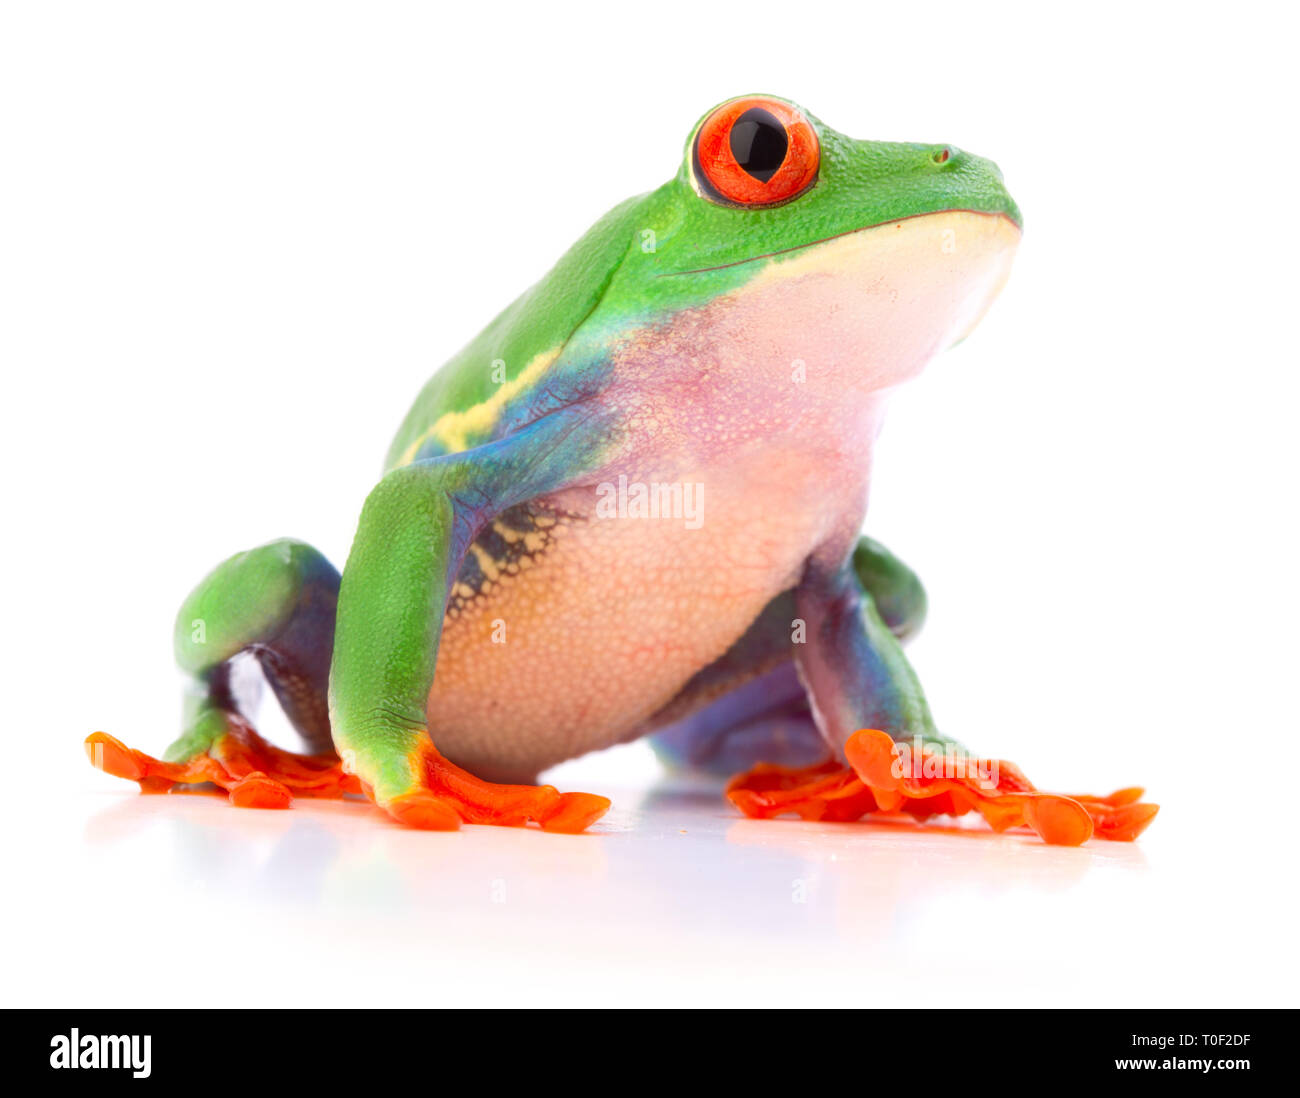 Red eyed tree frog a tropical animal from the endangered rain forest in Costa Rica siolated on white. Stock Photo